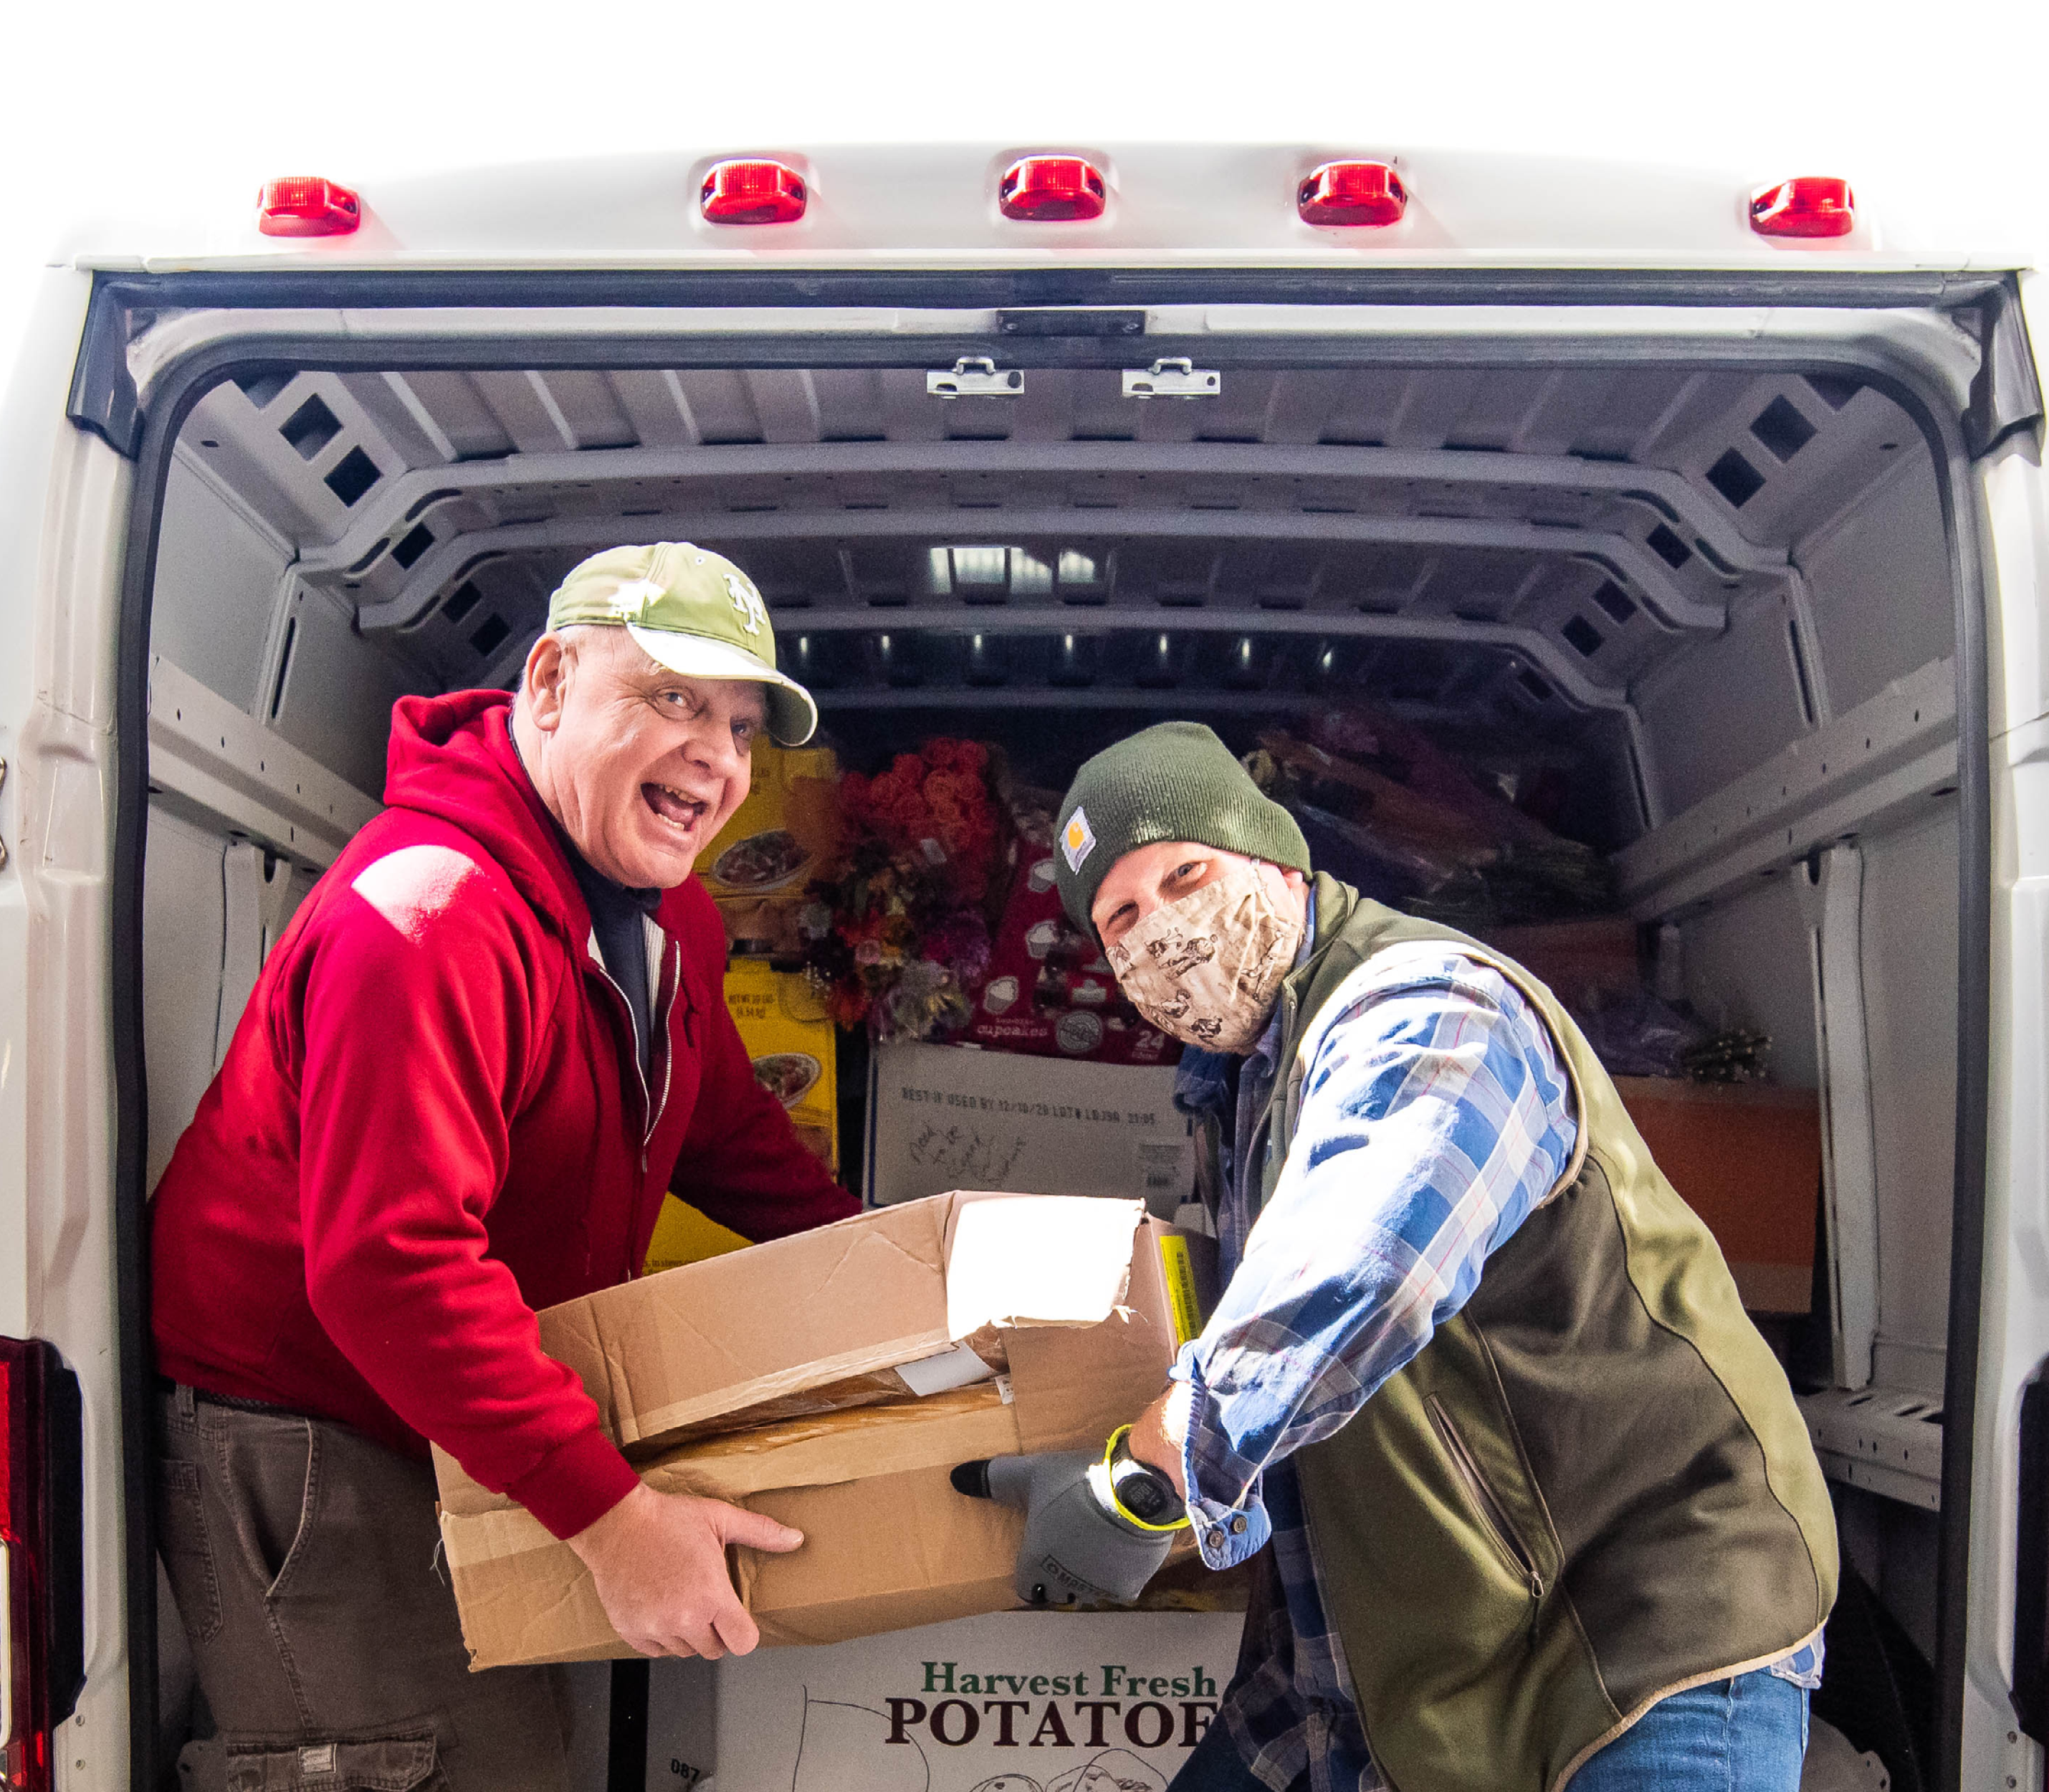 Two men who are food pantry volunteers unloading boxes from van